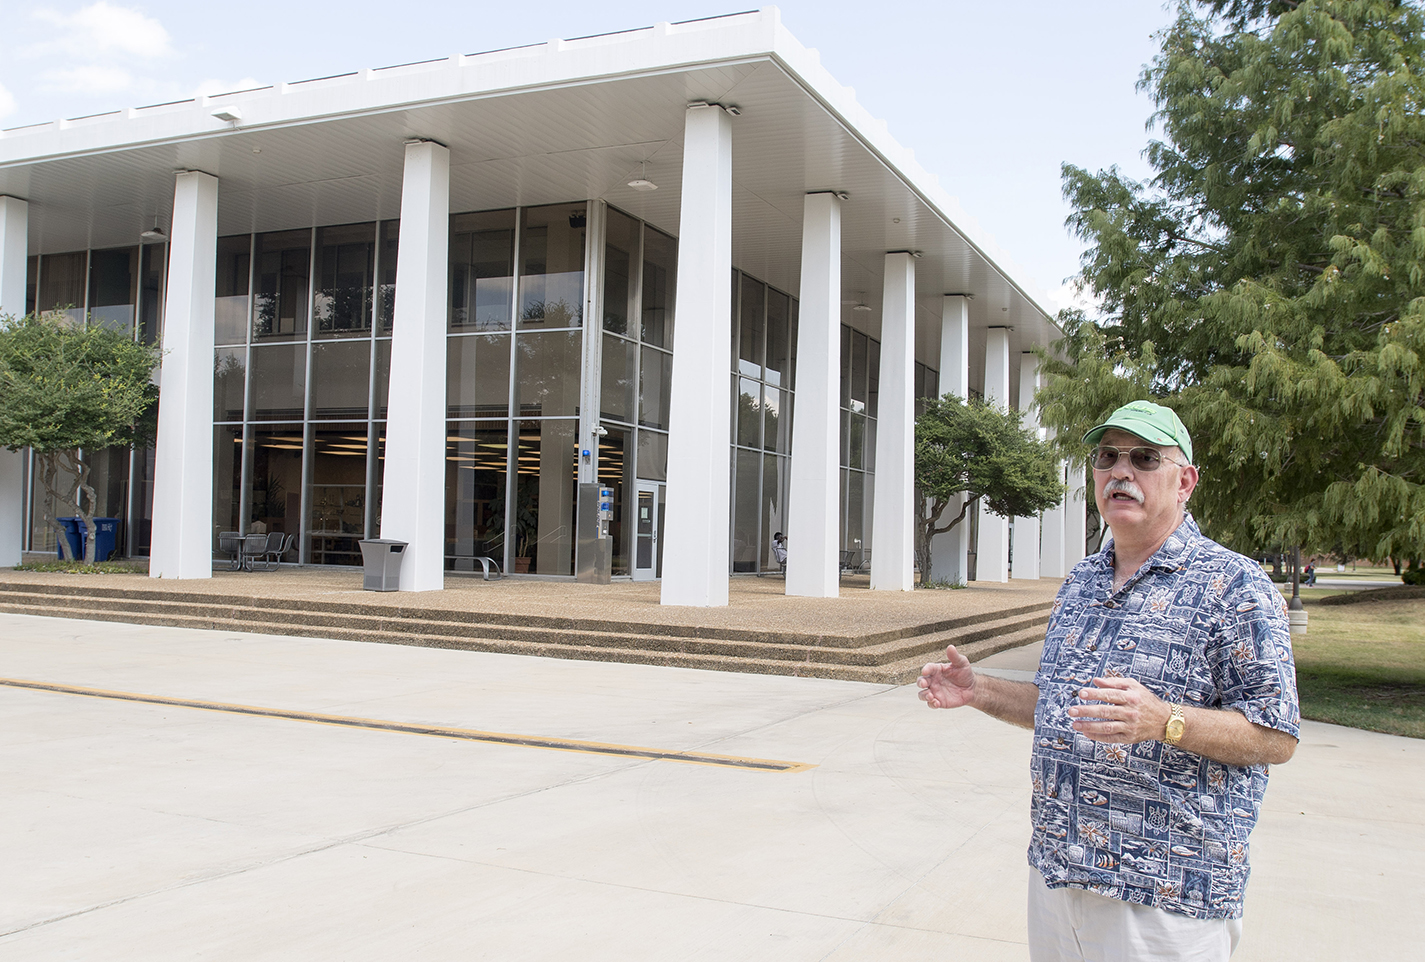 Former Tarrant County Junior College student Mark Smith reflects on South Campus life during the 1970s. He recalls a bomb threat that drew a crowd of students to the library.